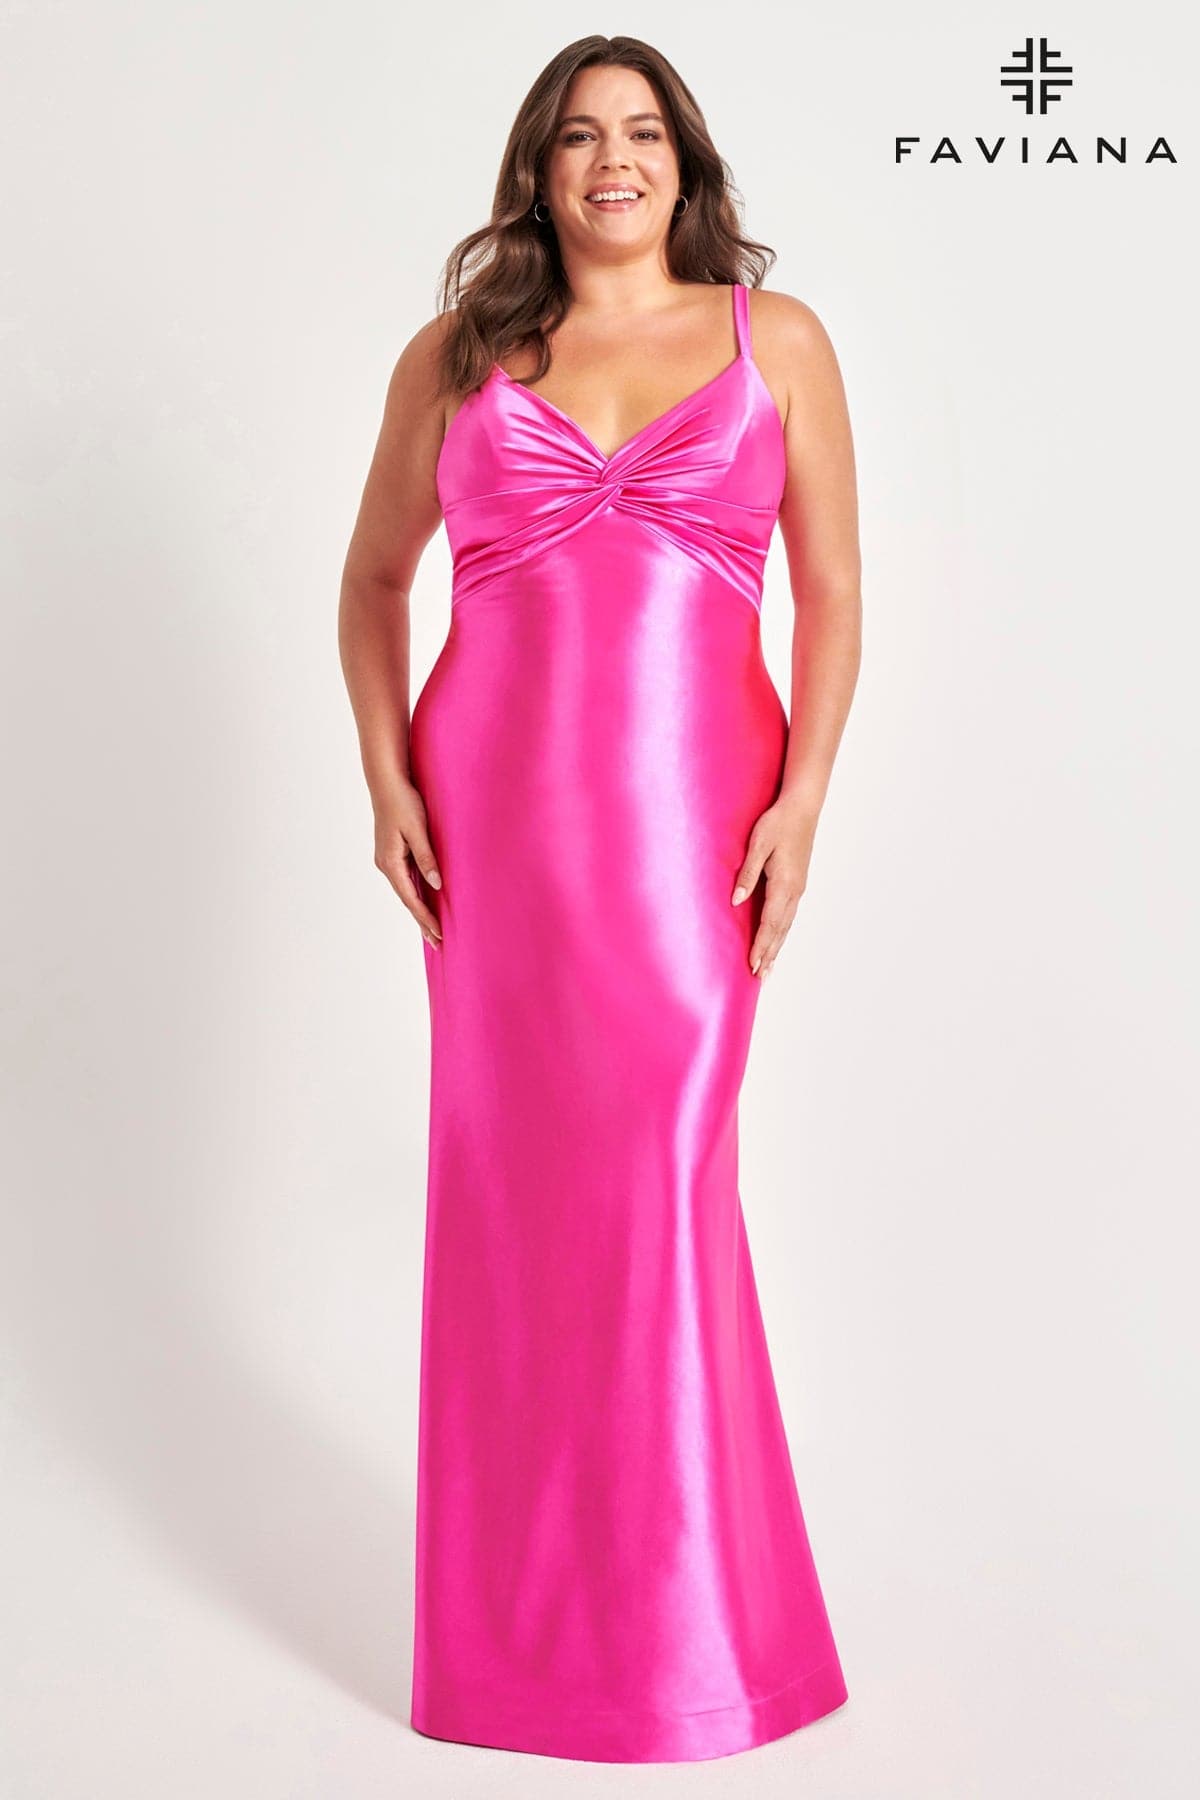 Hot Pink V Neckline Prom Dress With Stretch Fabric And Corset Back